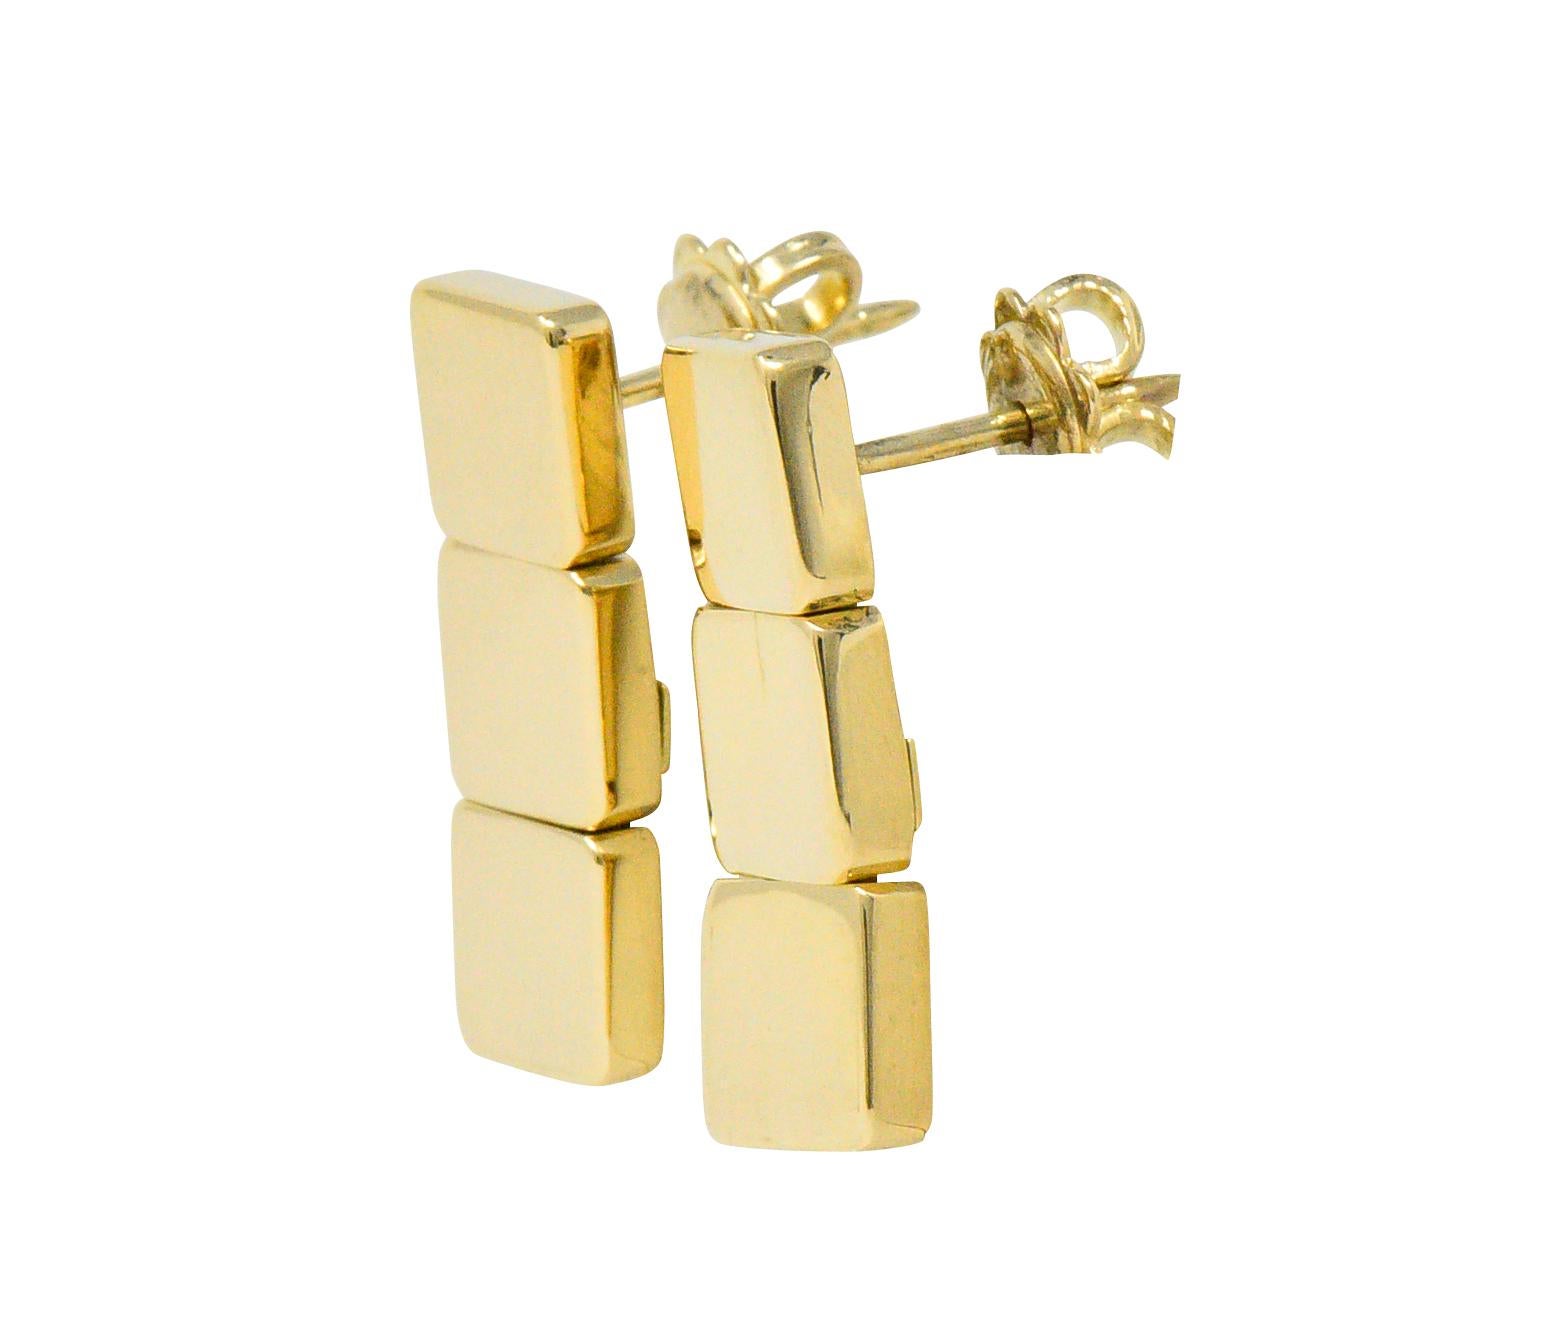 Featuring 3 highly polished square gold links

Post and friction backs

Signed T & Co., Italy, 2002

Measuring: Approx. 20.9 mm x 6.8 mm

Total Weight: 8.0 Grams

Sleek. Contemporary. Simple. 
 


Stock Number: We- 1555